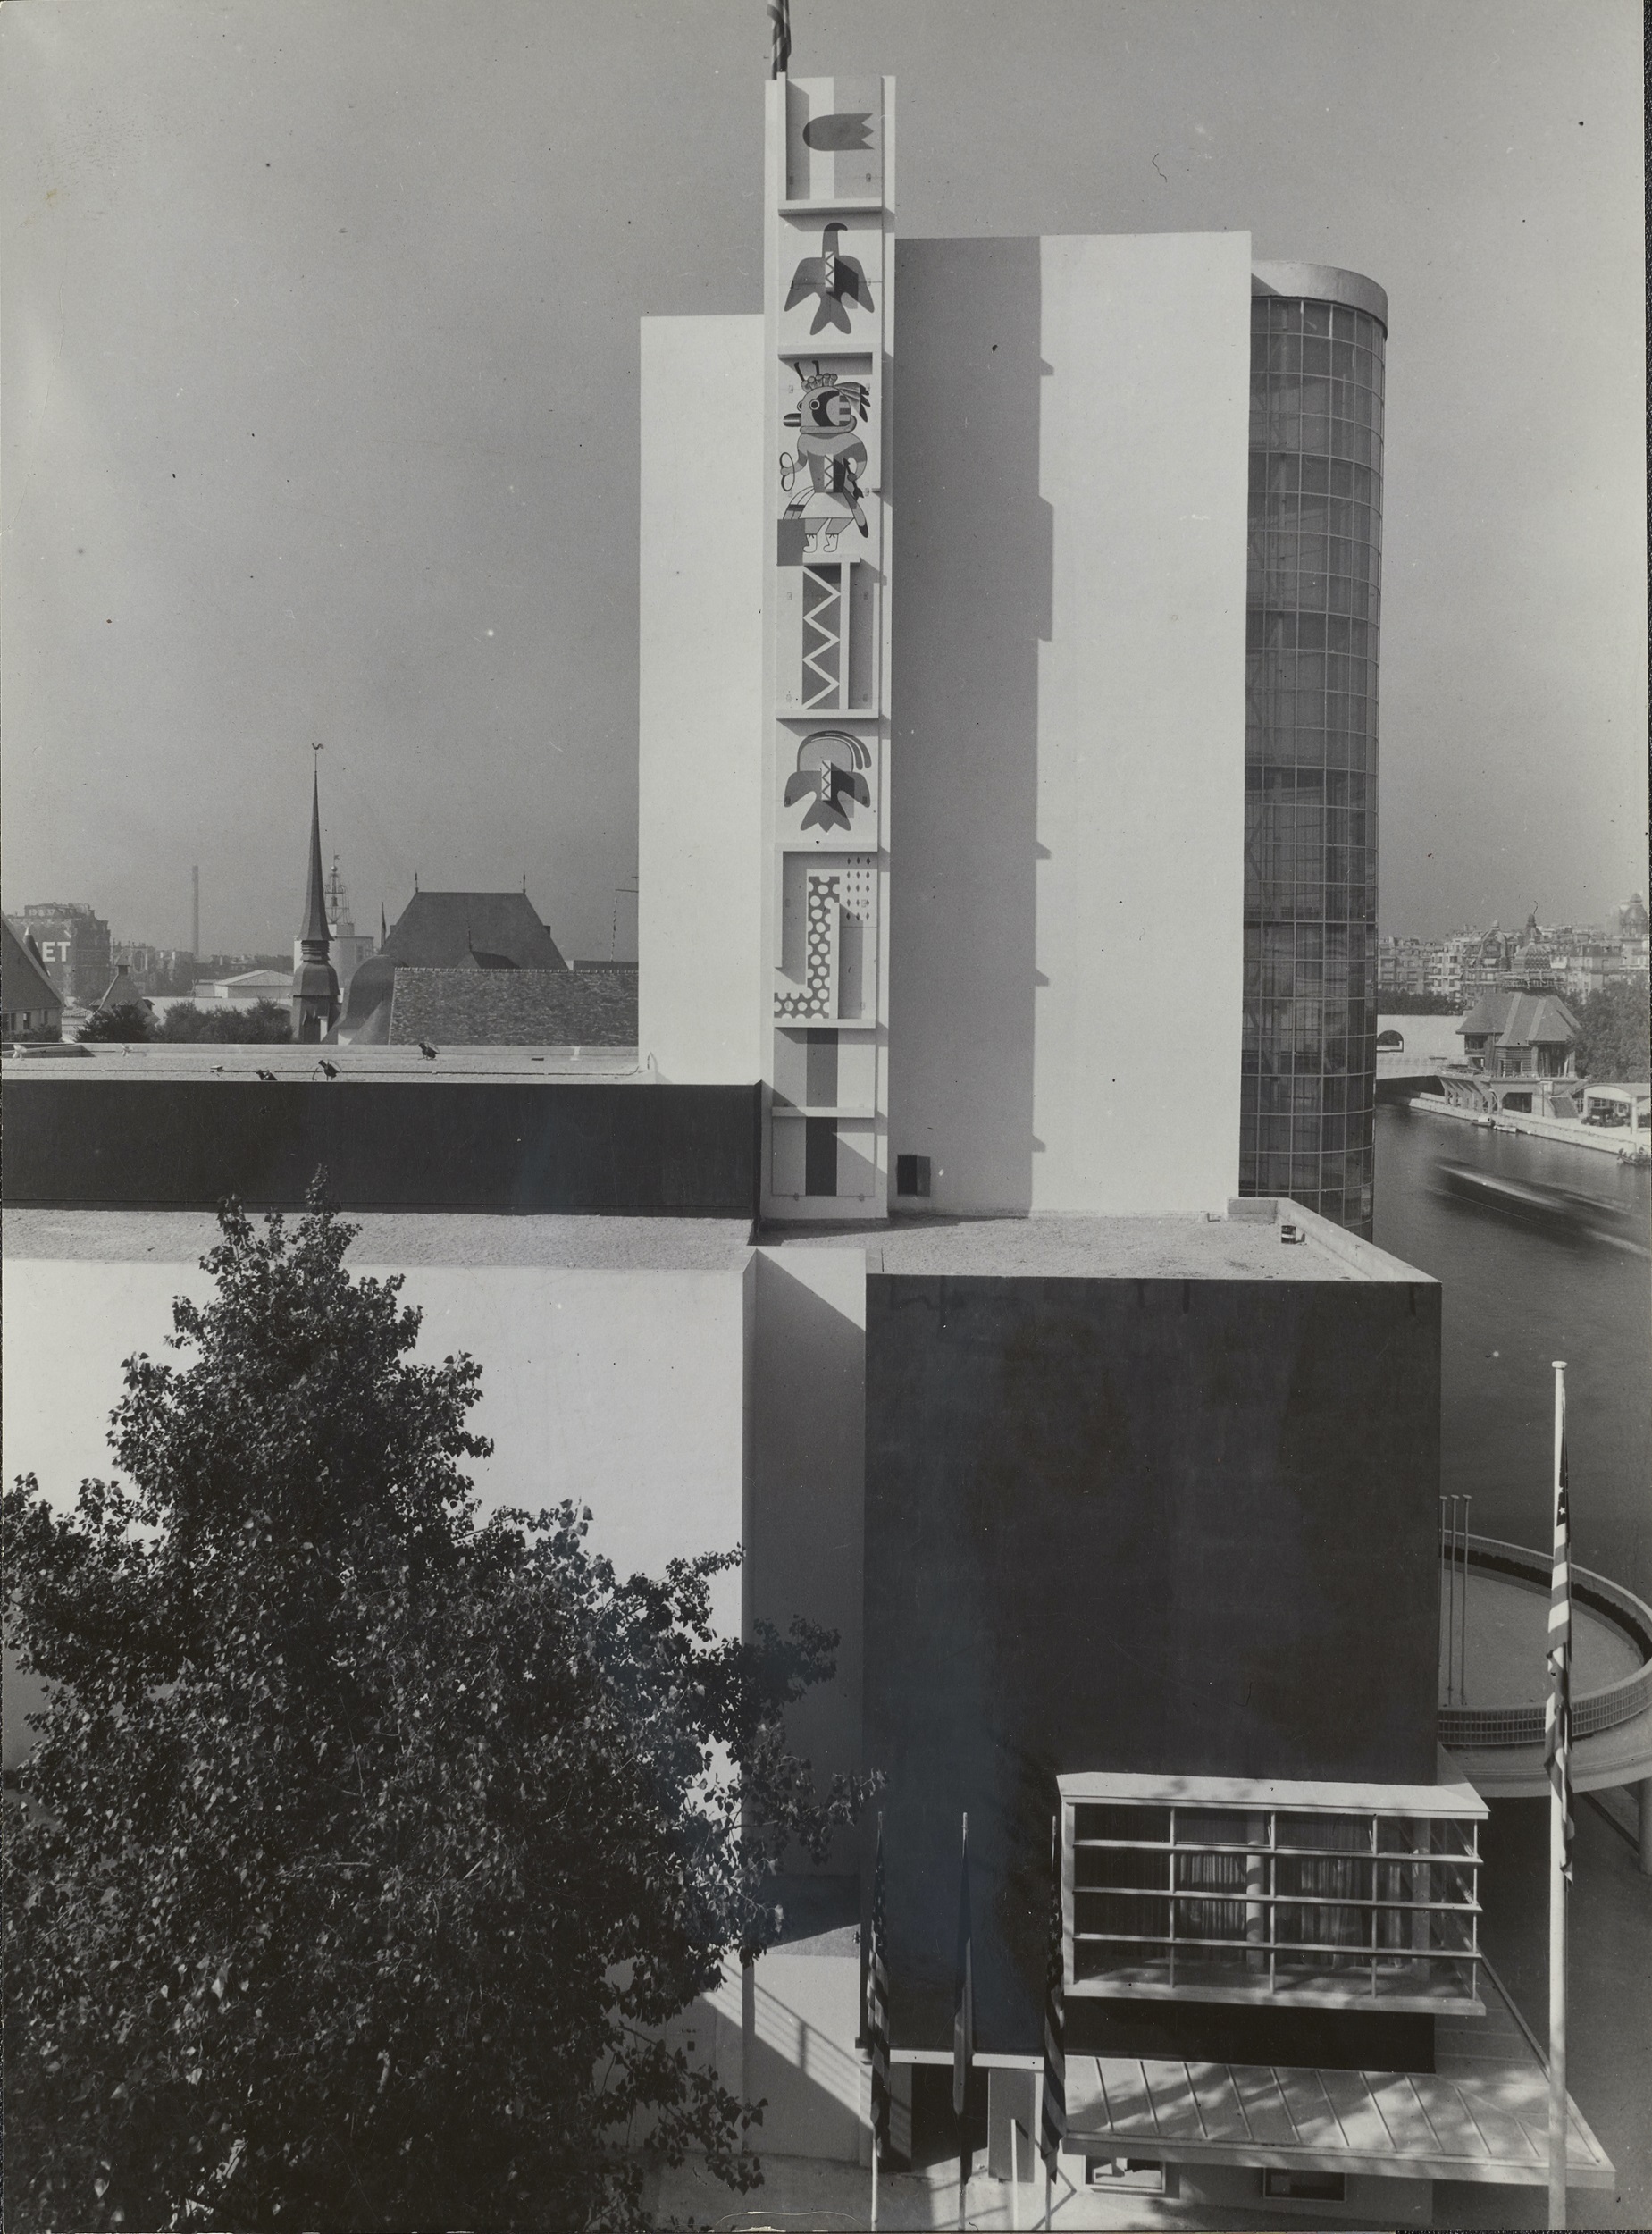 Black-and-white photograph of the architectural work seen in figure 1, but from a different angle highlighting the mural painted along a tall vertical tower